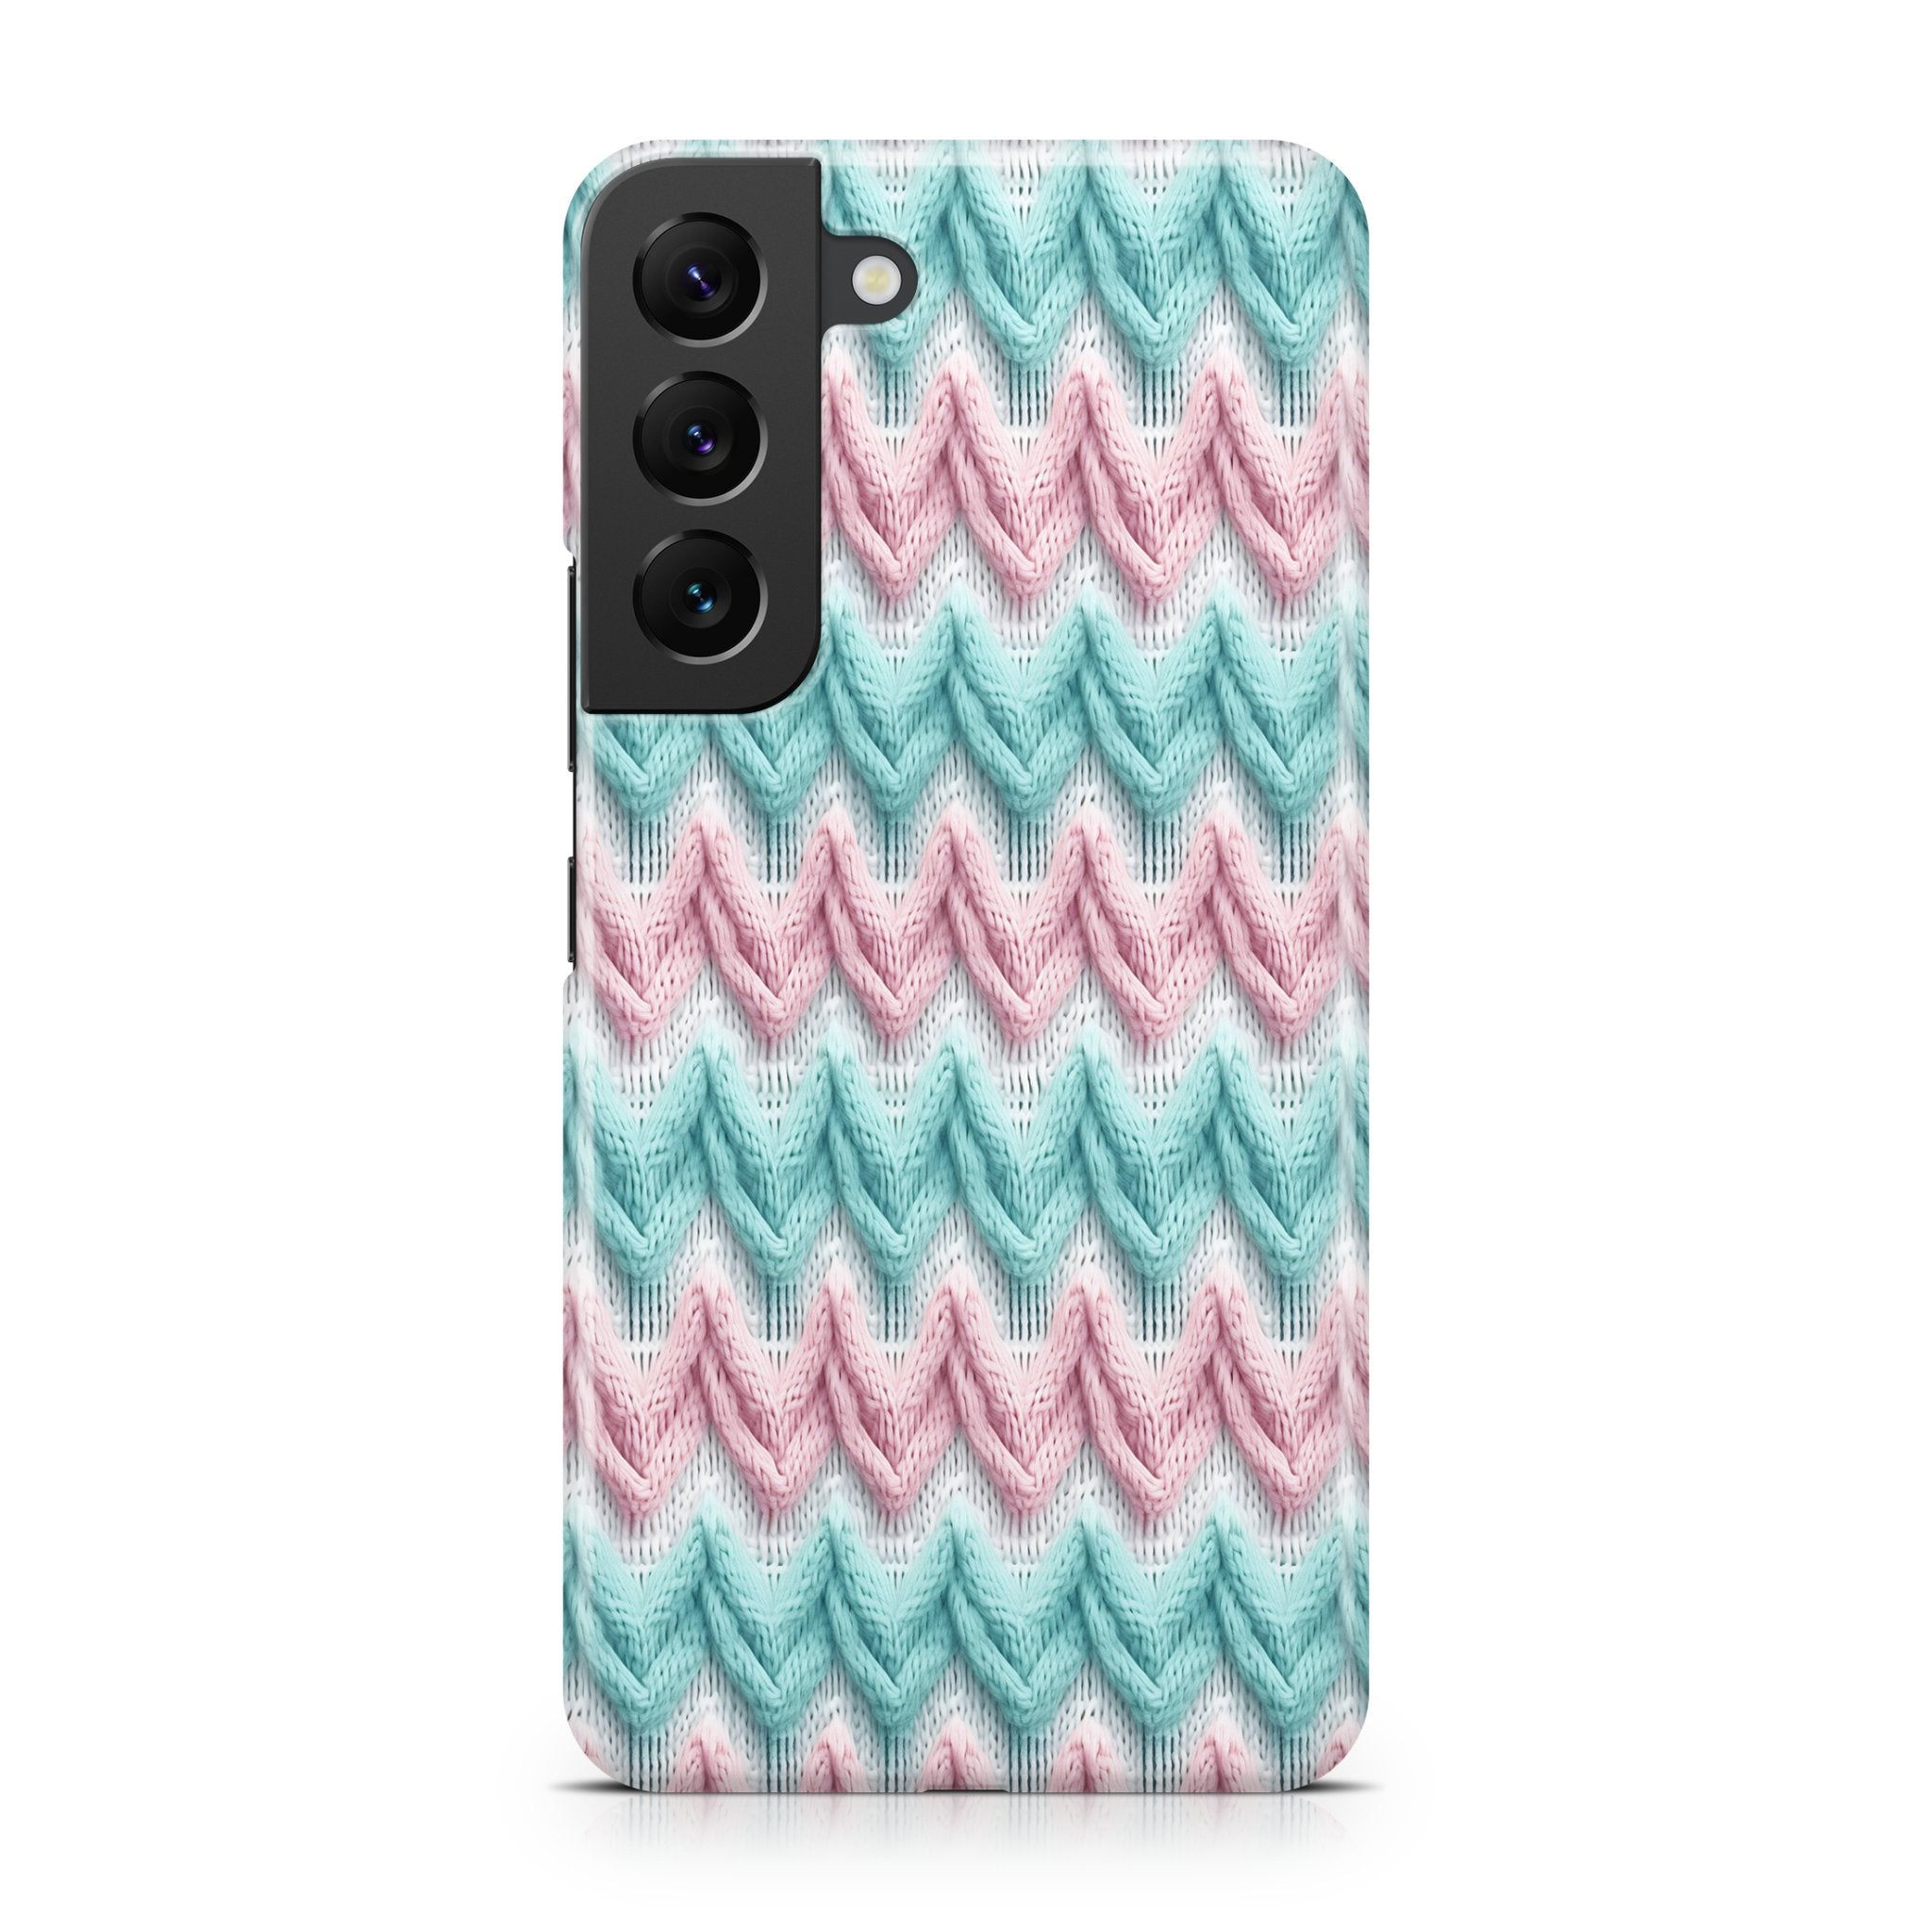 Dreamy Hues - Samsung phone case designs by CaseSwagger